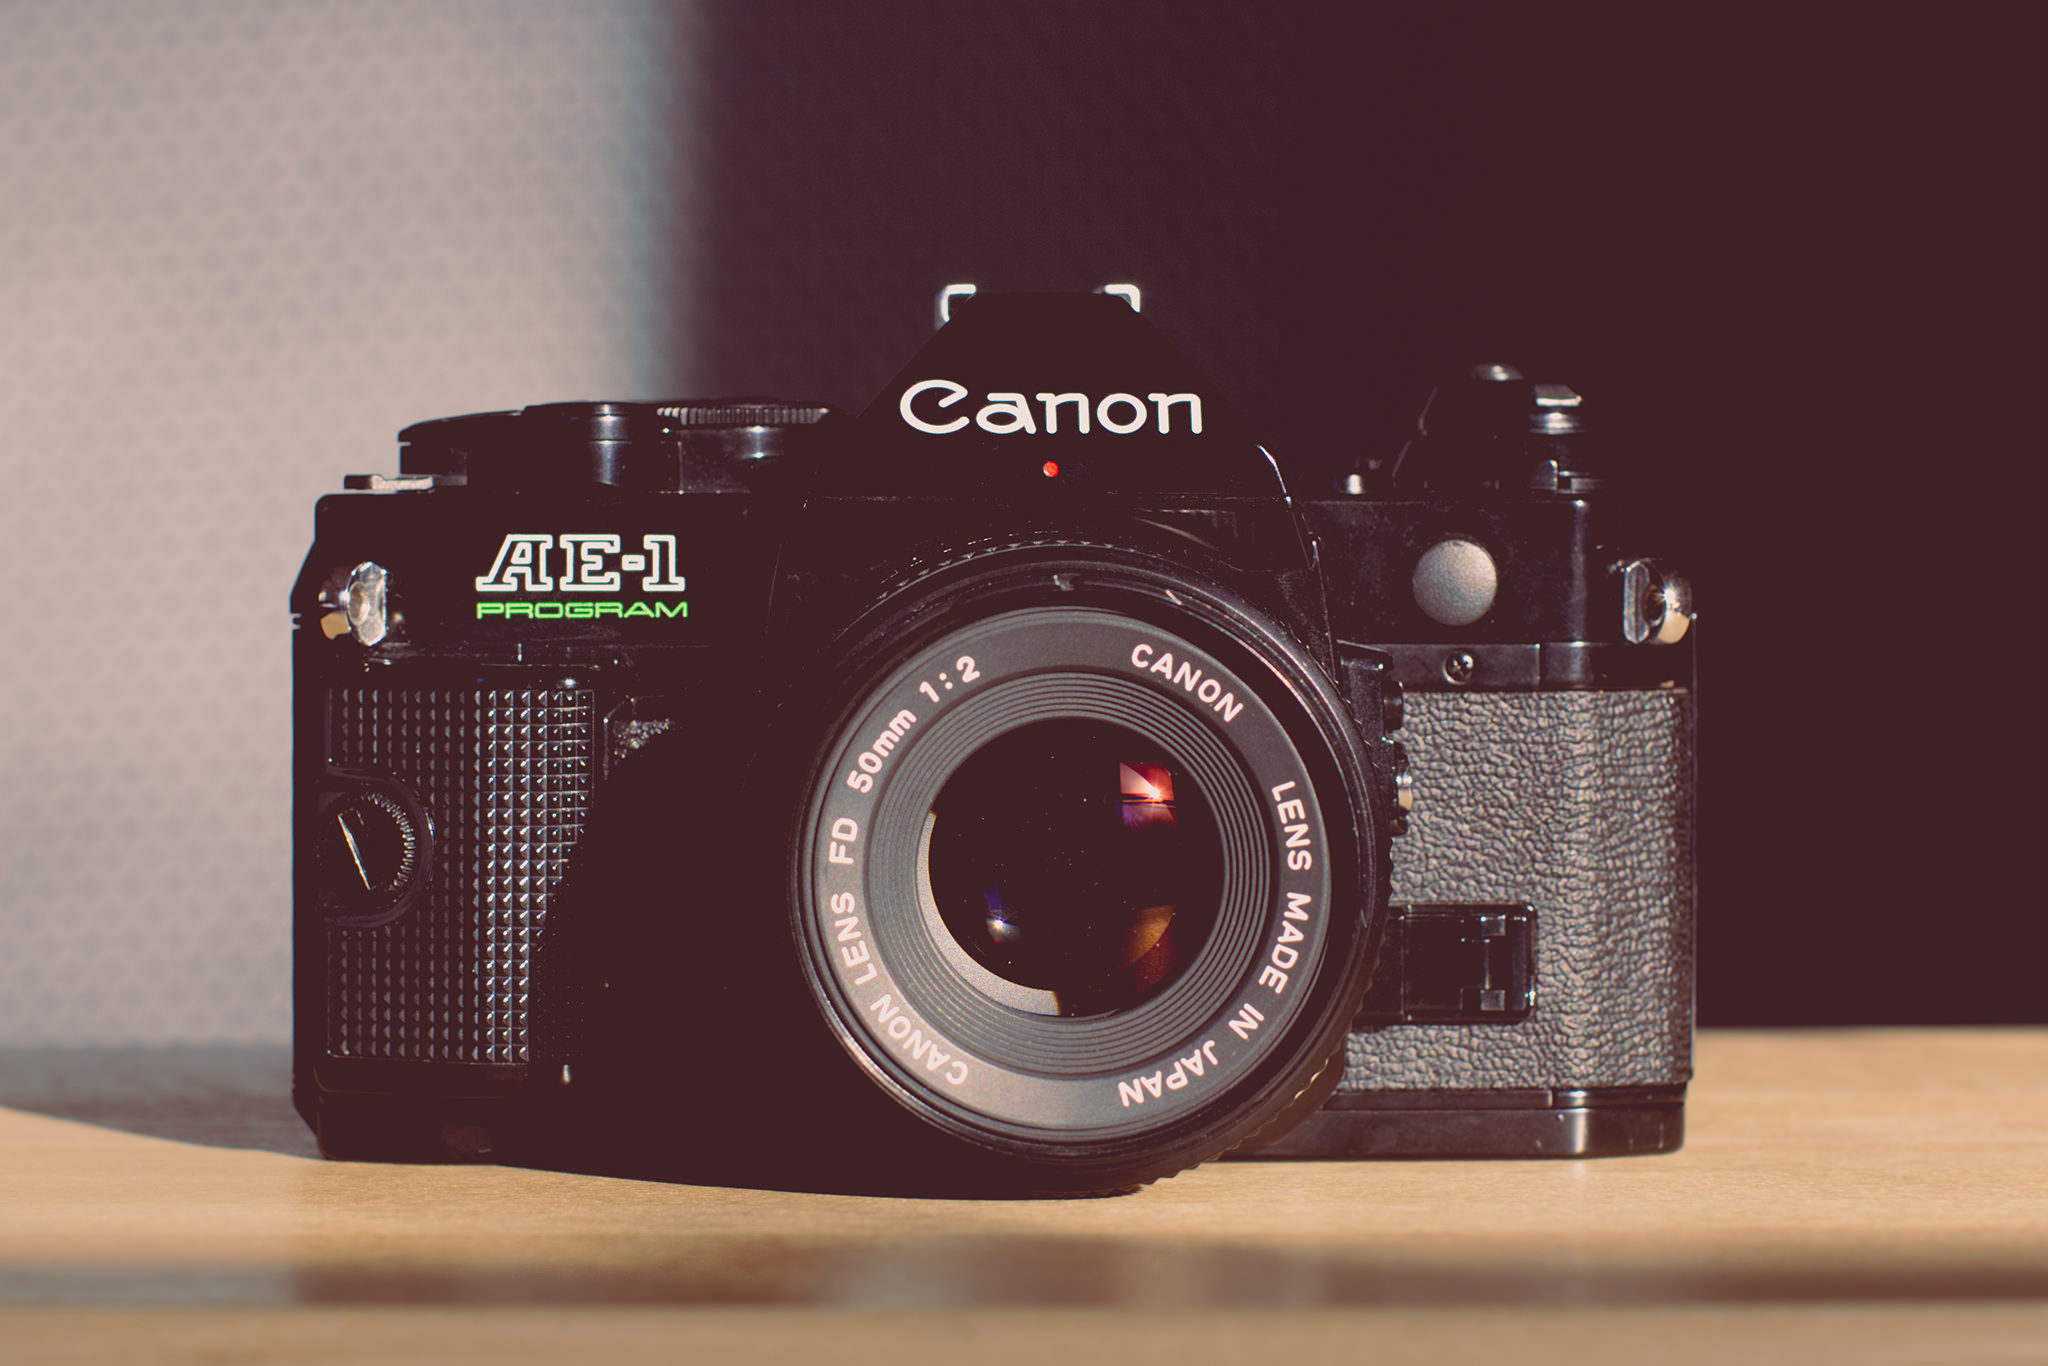 Canon AE-1 Program - Learn more about this 35mm SLR camera